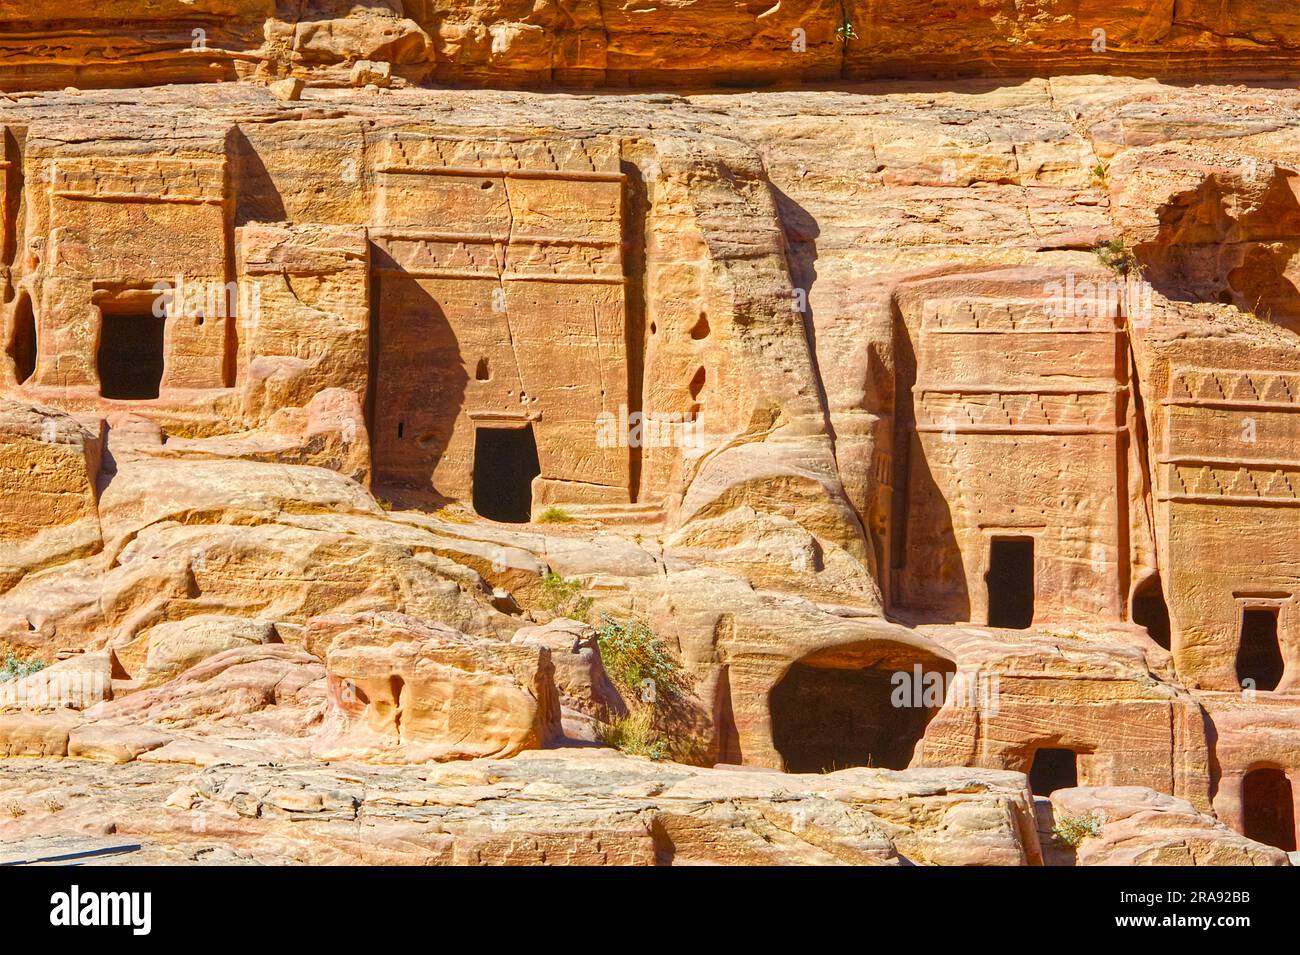 Cavities in the cliffs in the archeological site of Petra in Jordan Stock Photo